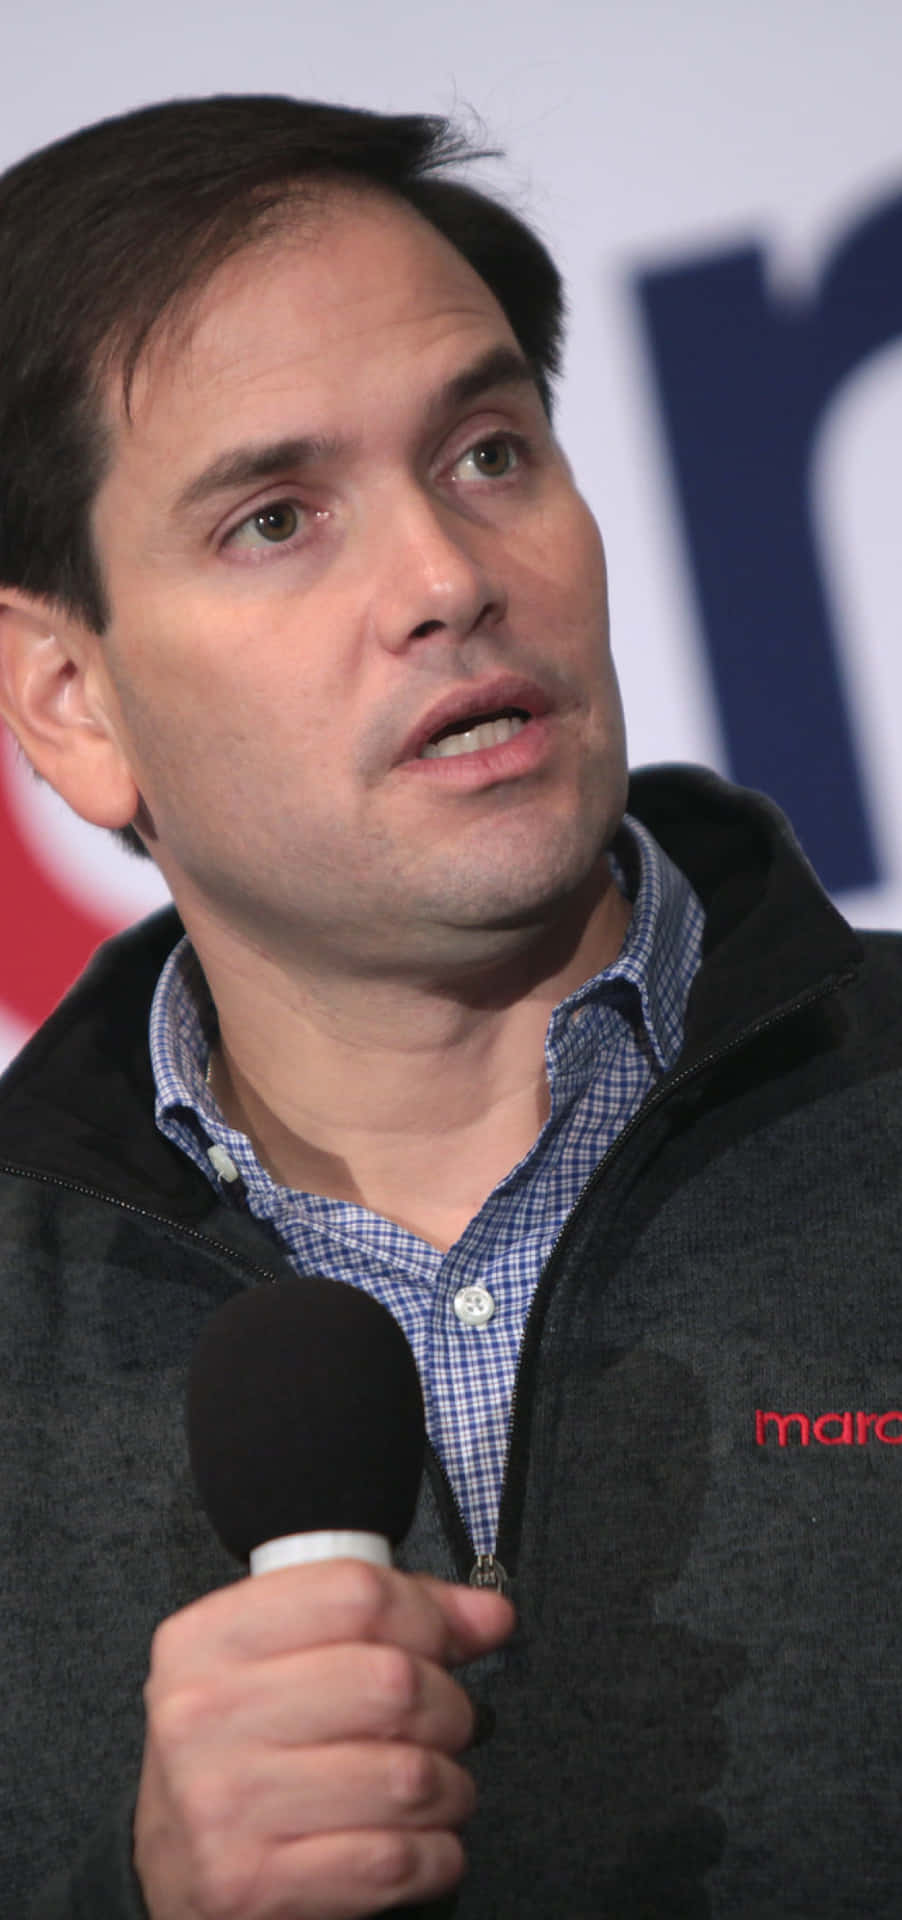 Senator Marco Rubio passionately addressing an audience with a microphone Wallpaper